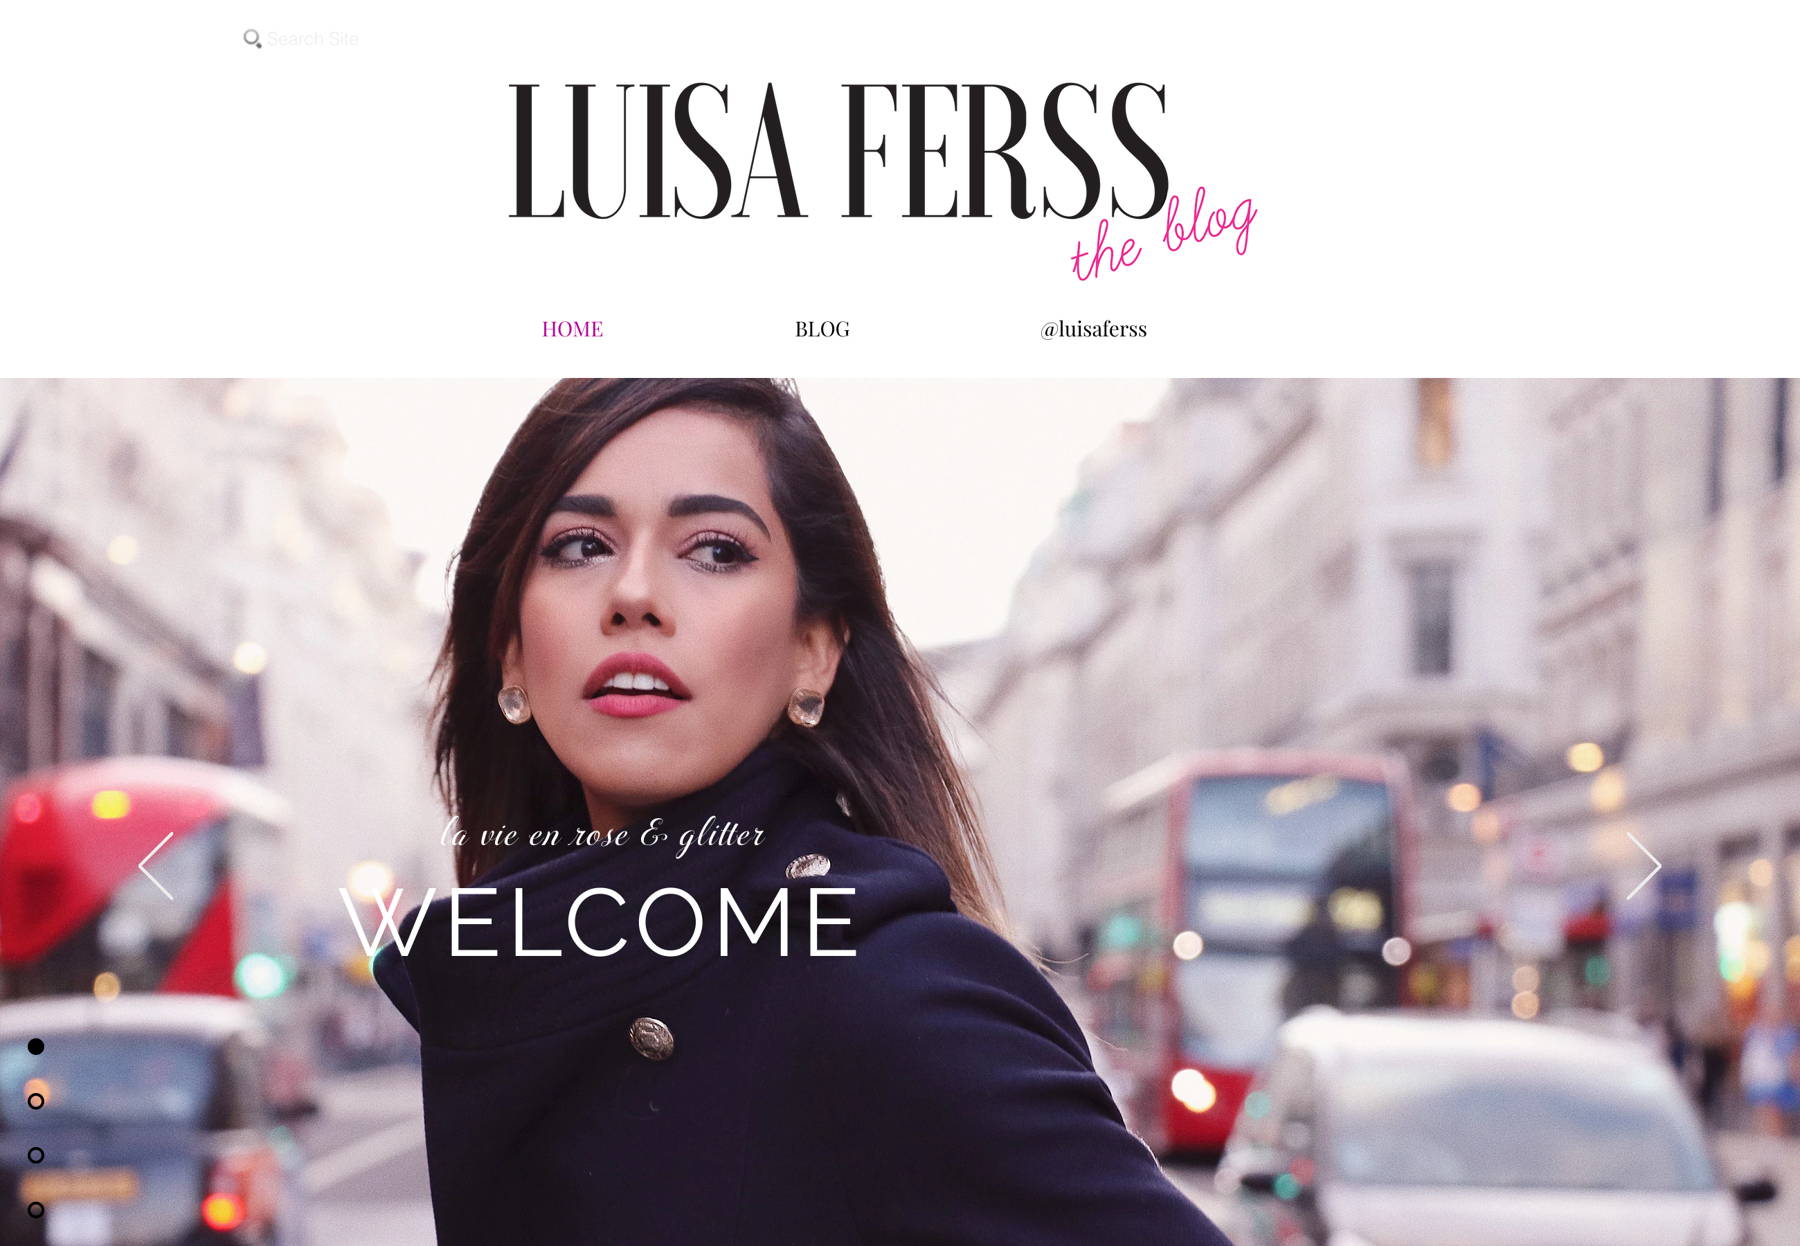 Screenshot of Luisa Ferss, from the beauty websites collection.